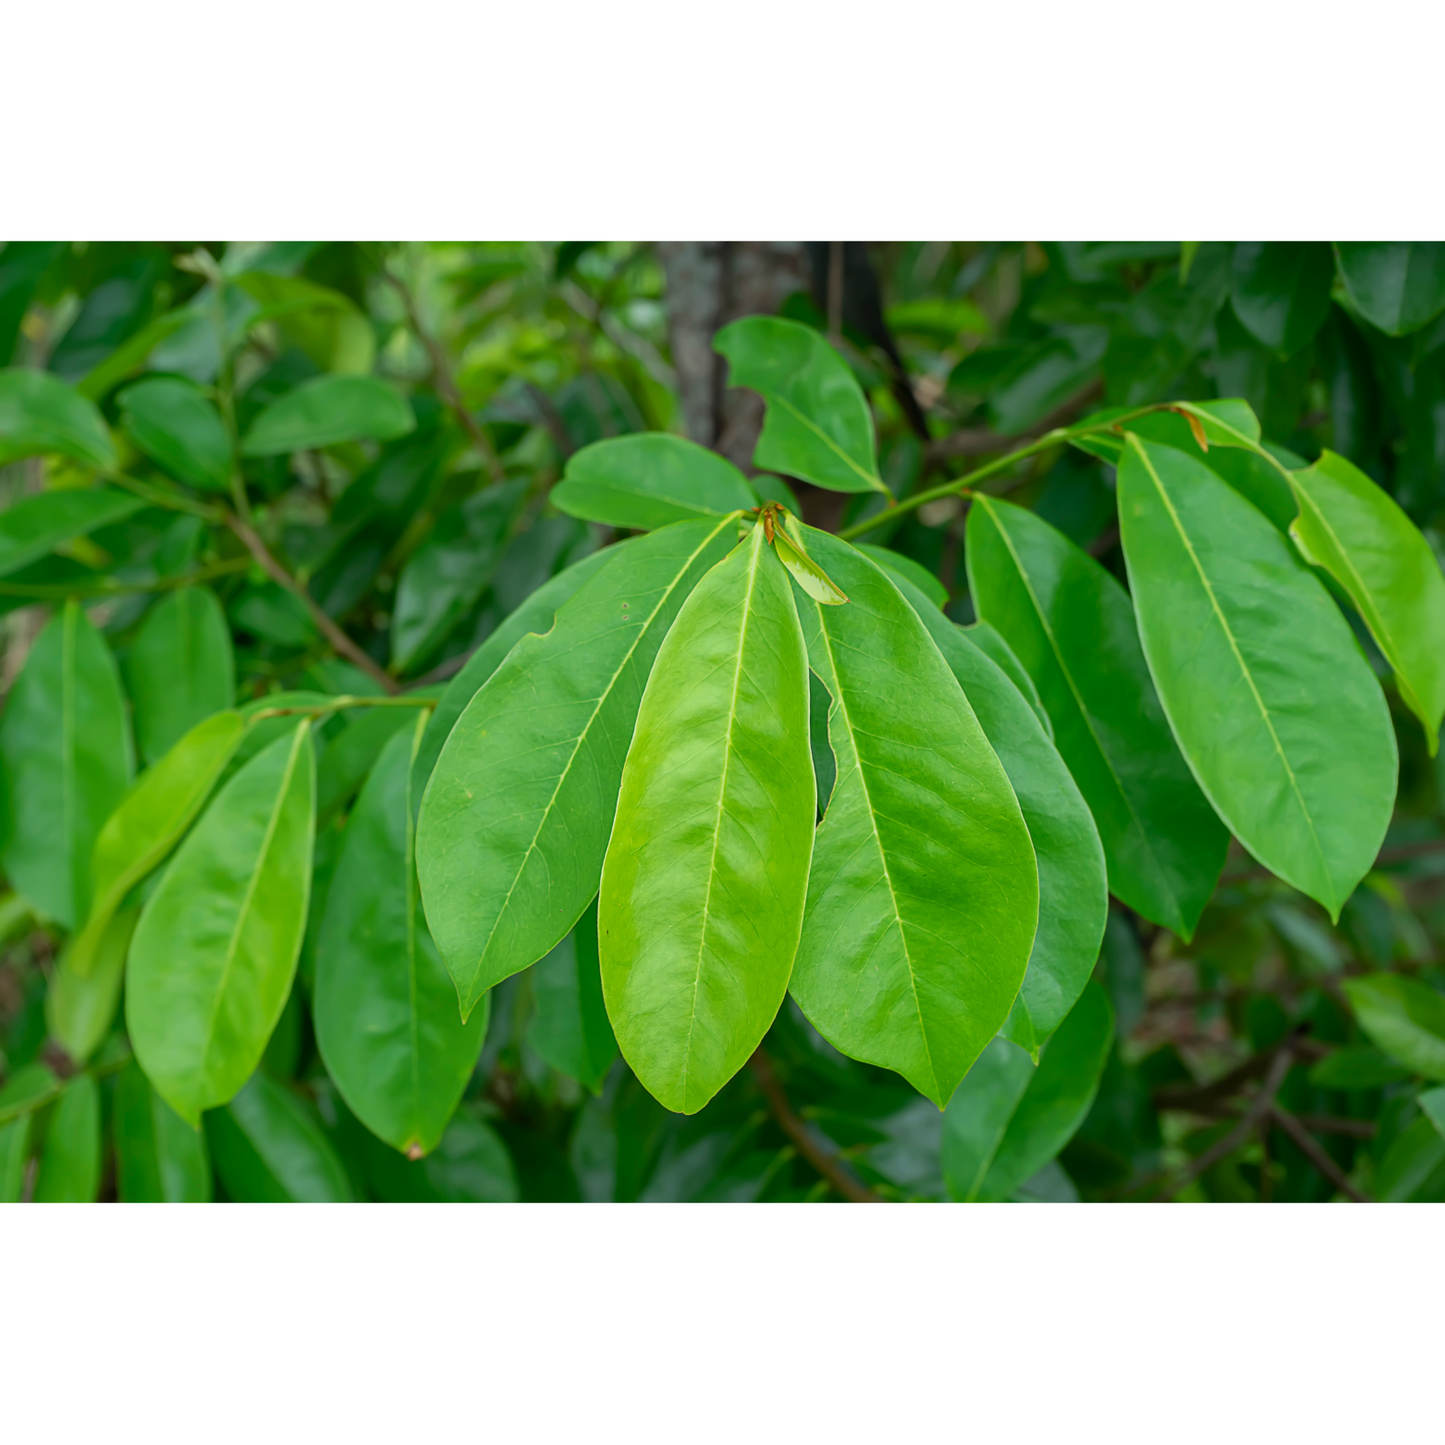 Soursop Leaves Tea Whole For Hoodoo, Rituals, Offerings to Deities